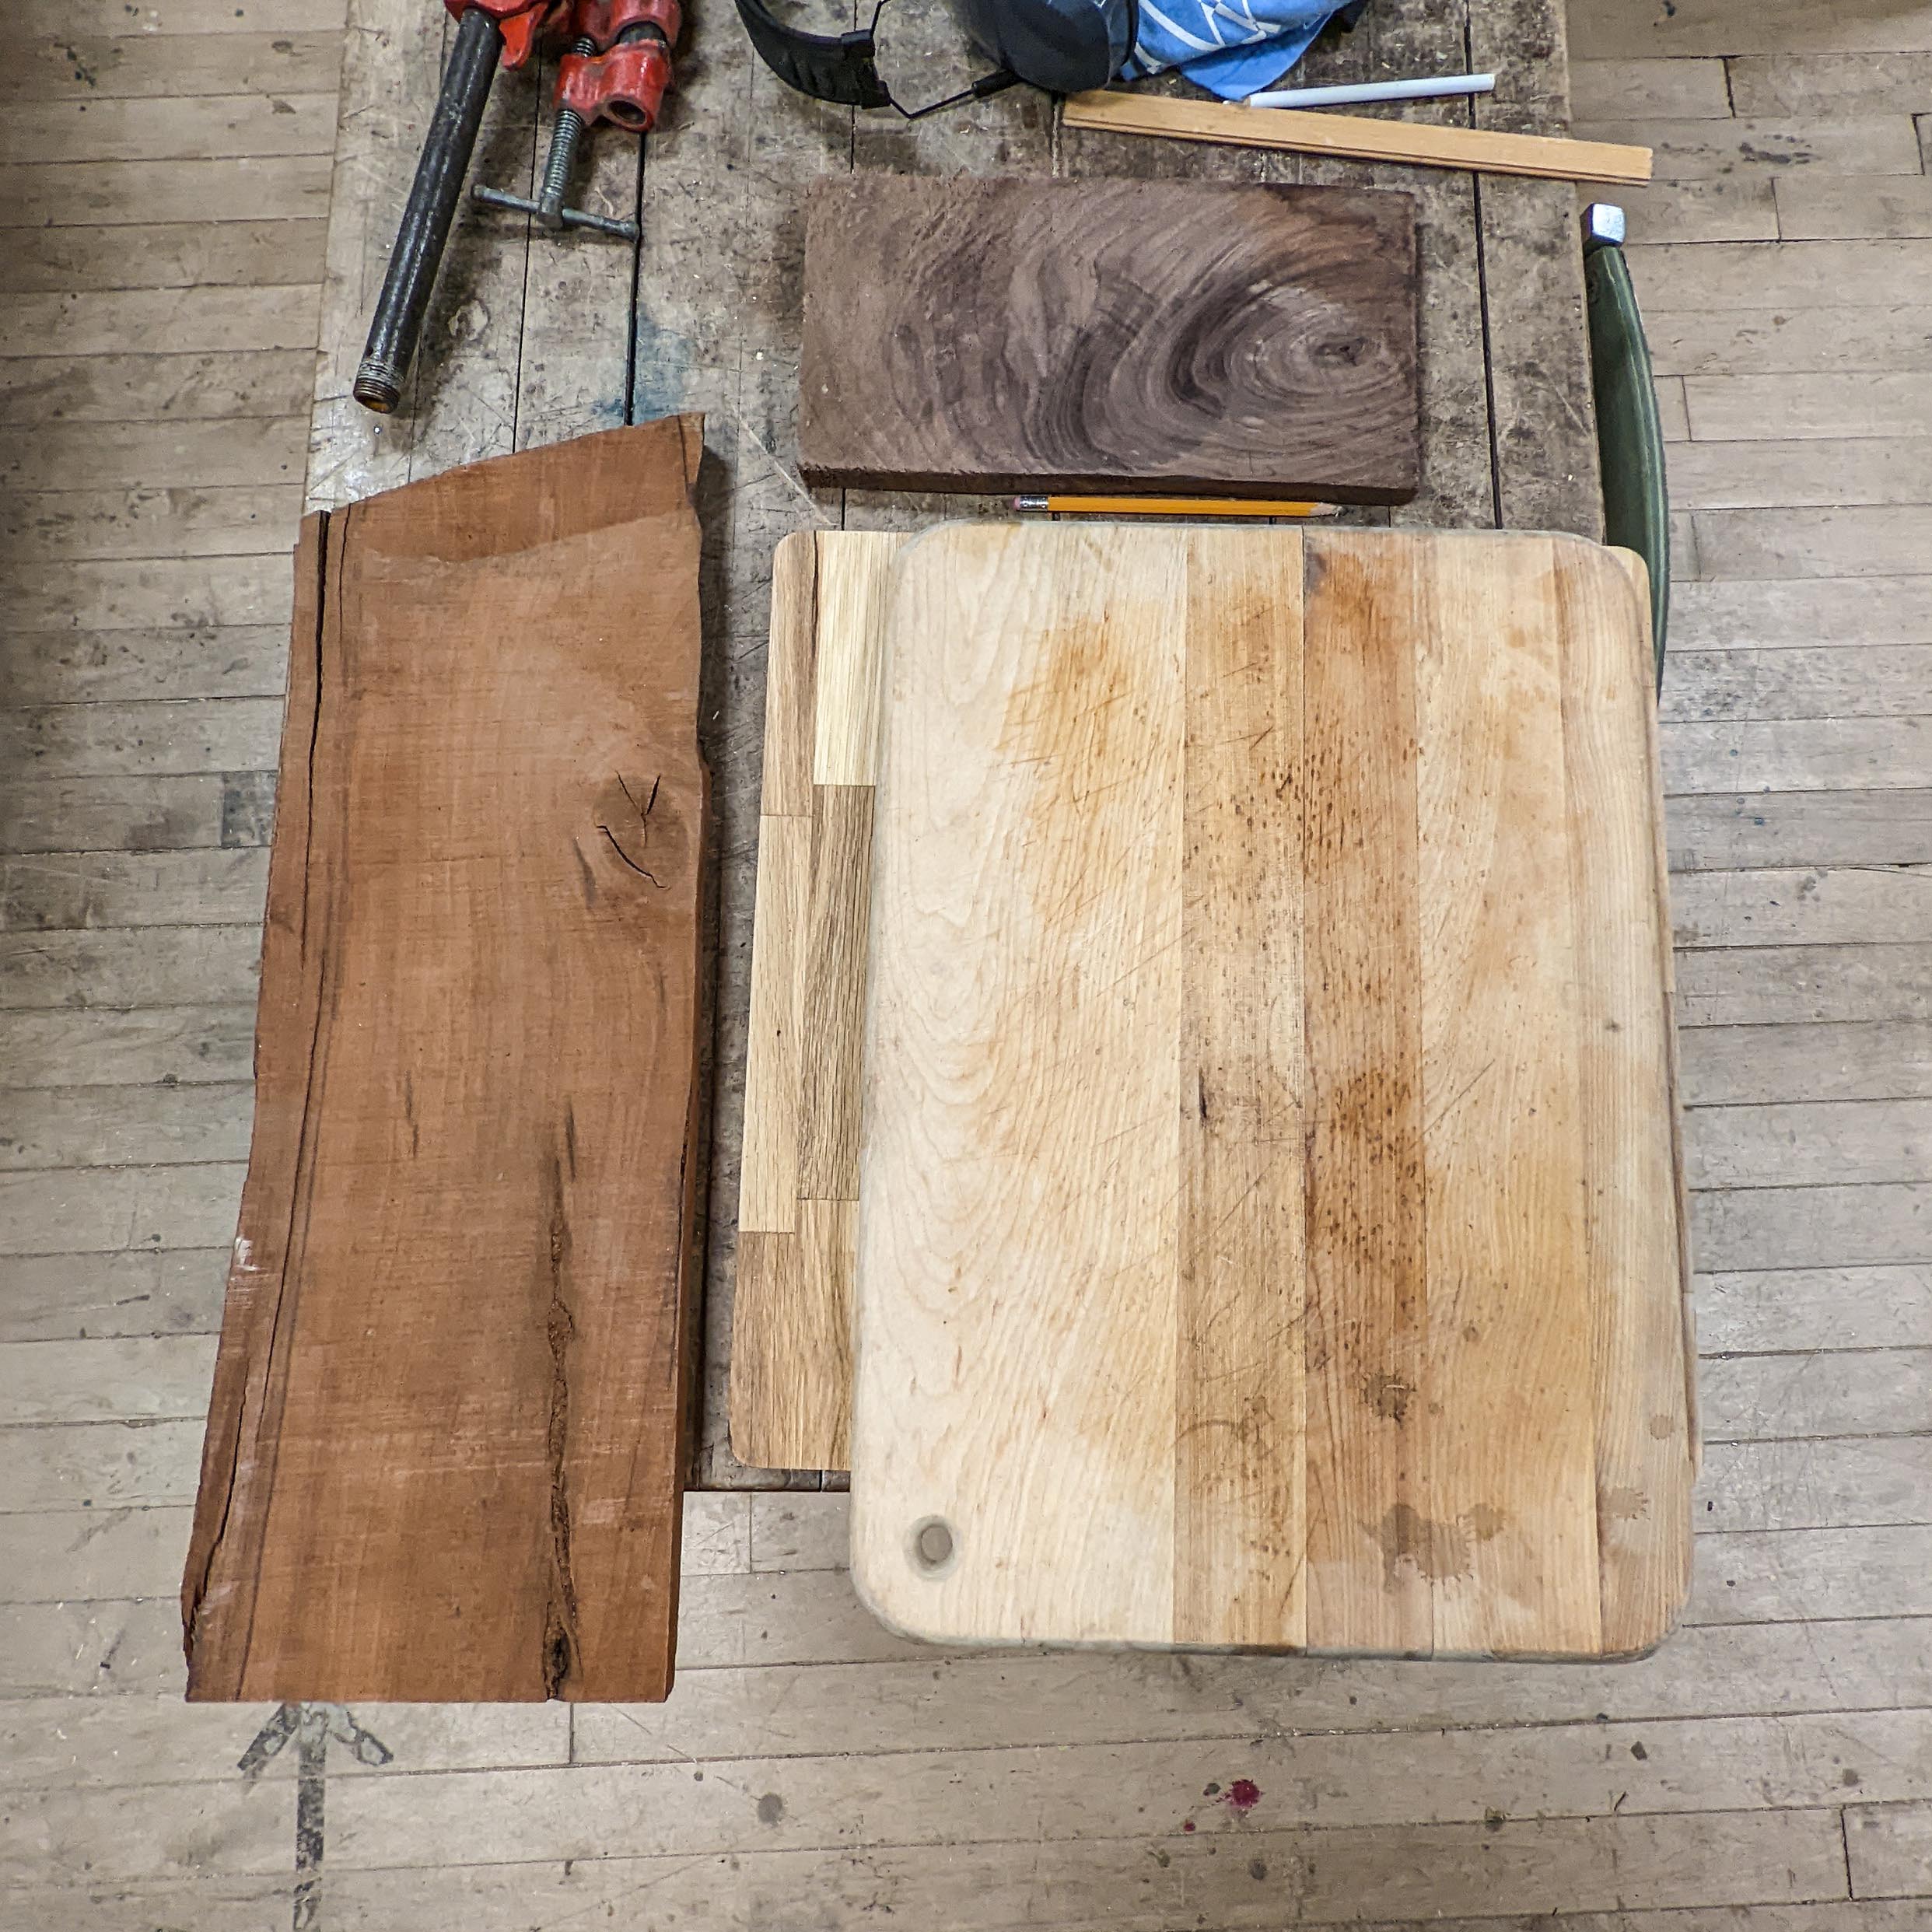 Raw wood planks and a ugly dated cutting board.